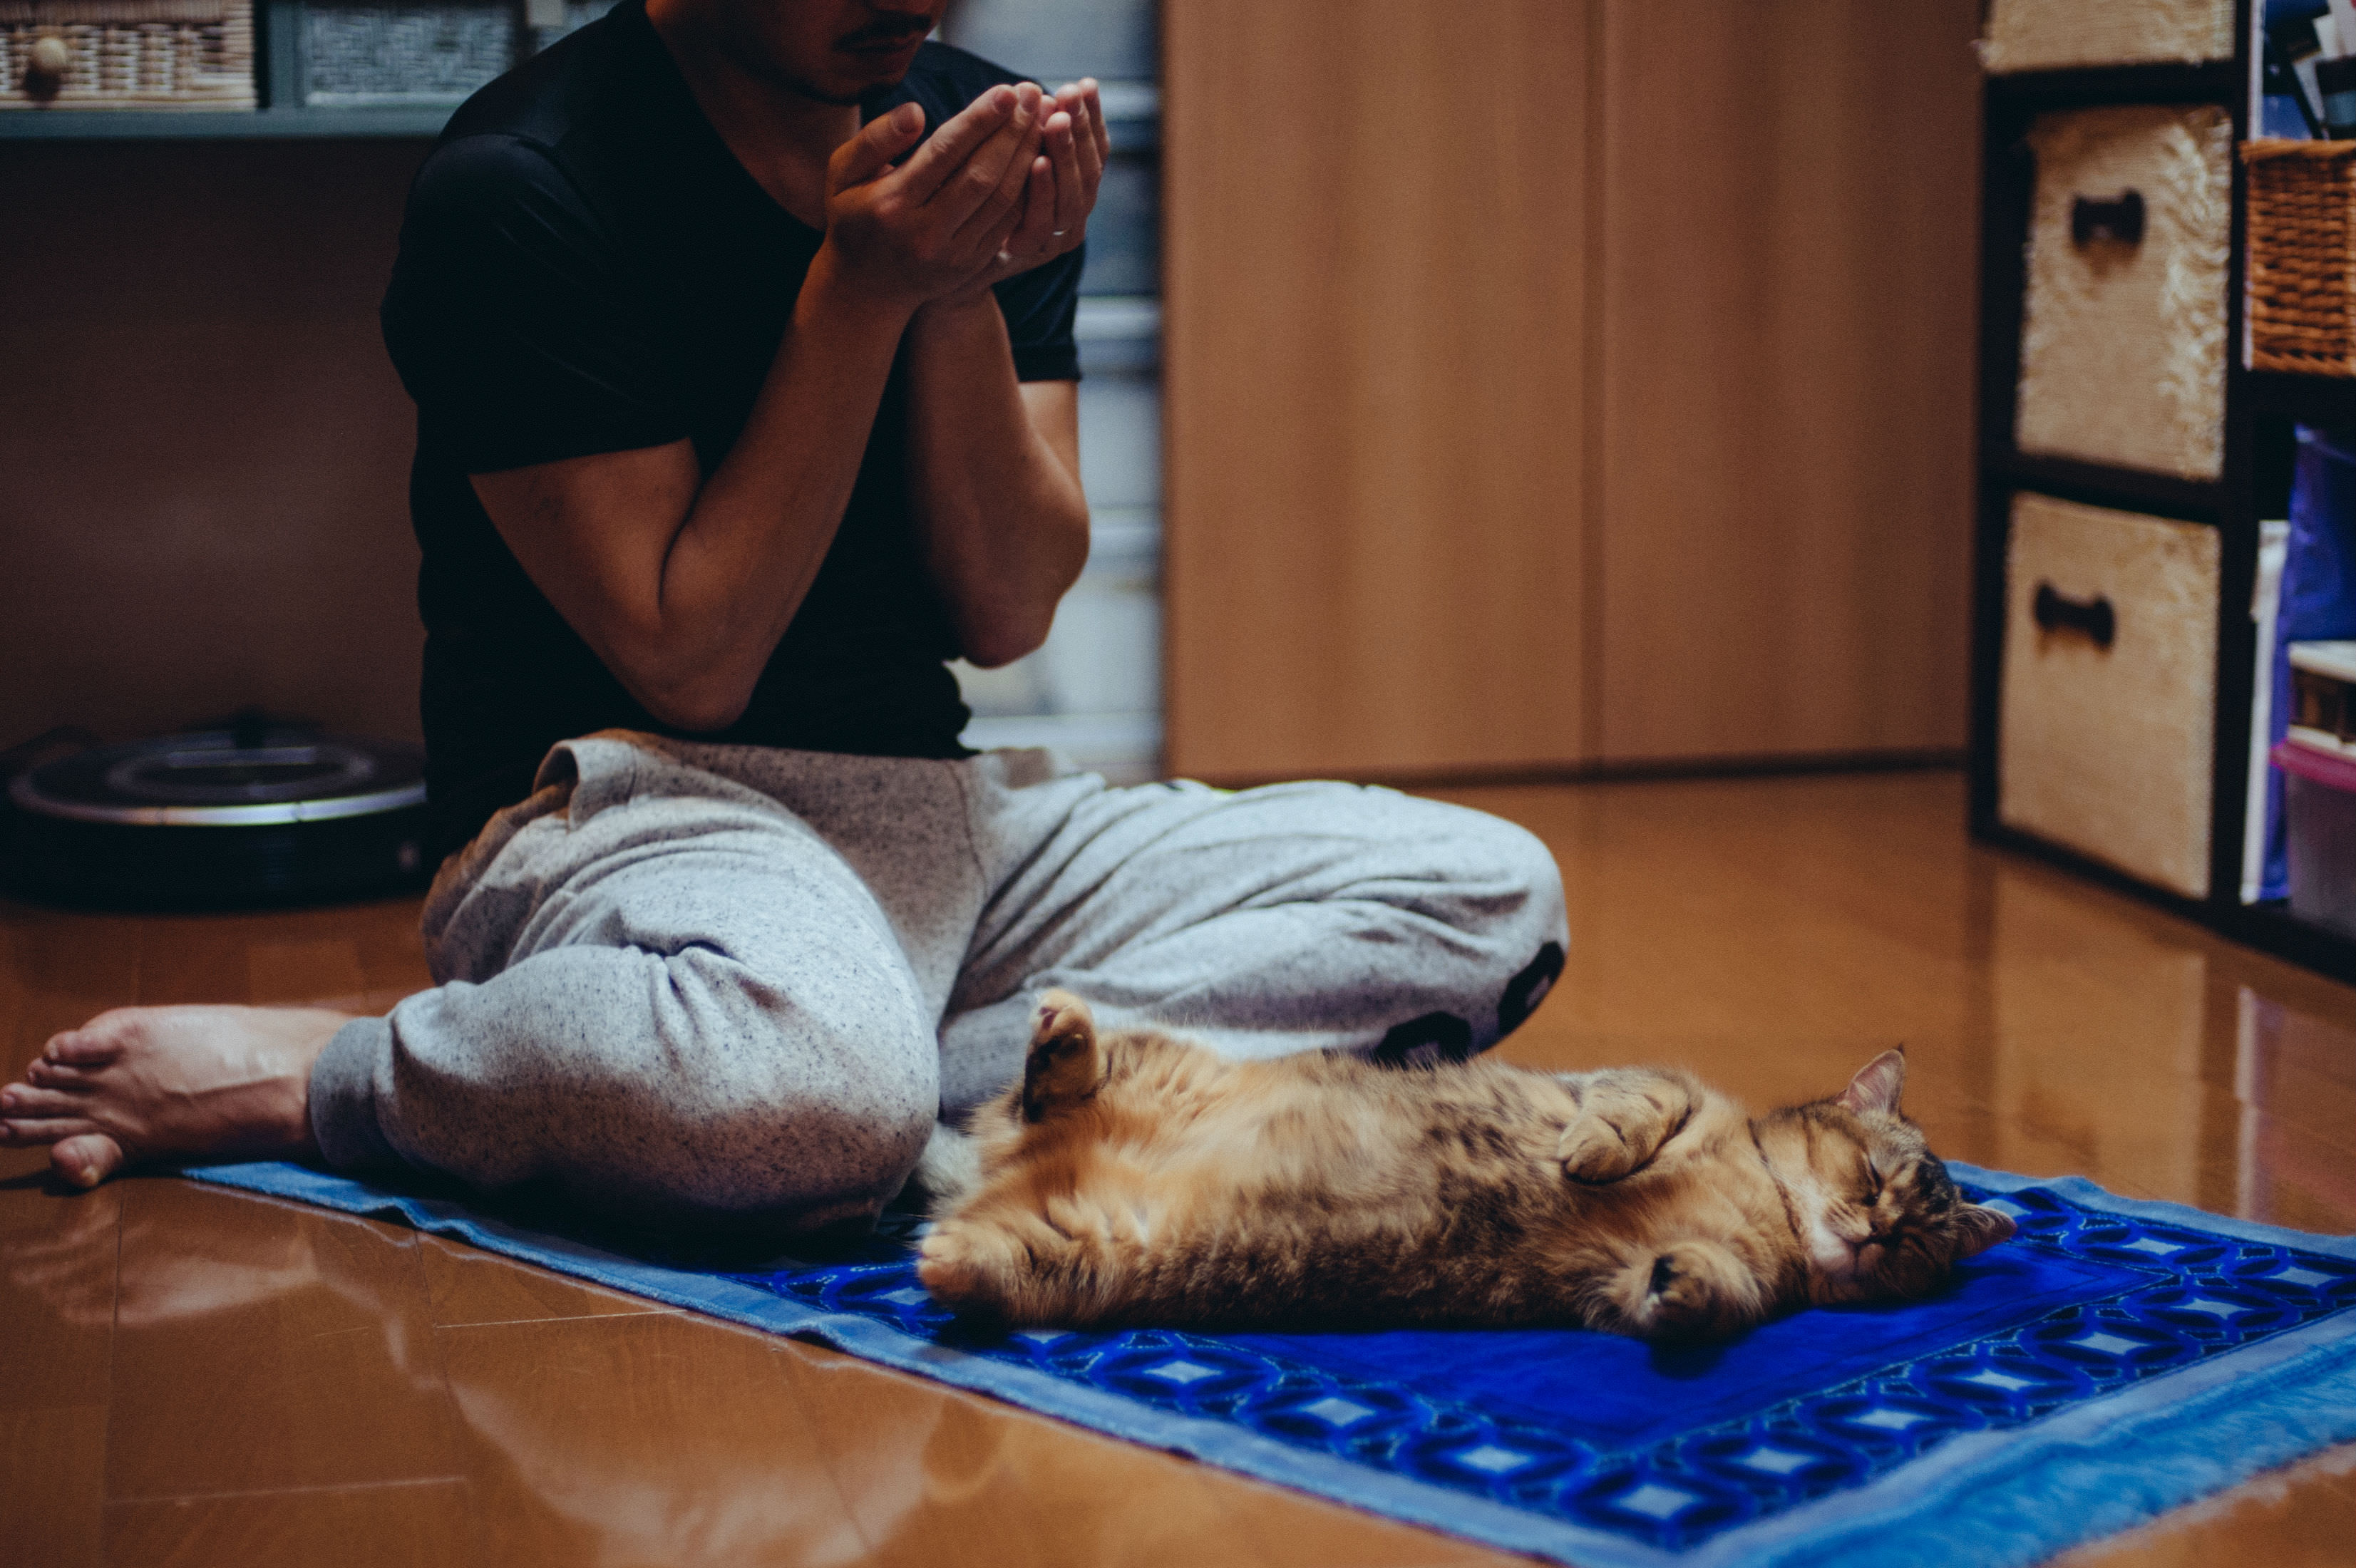 Man praying at home with cat (Getty Images/Nazra Zahri)